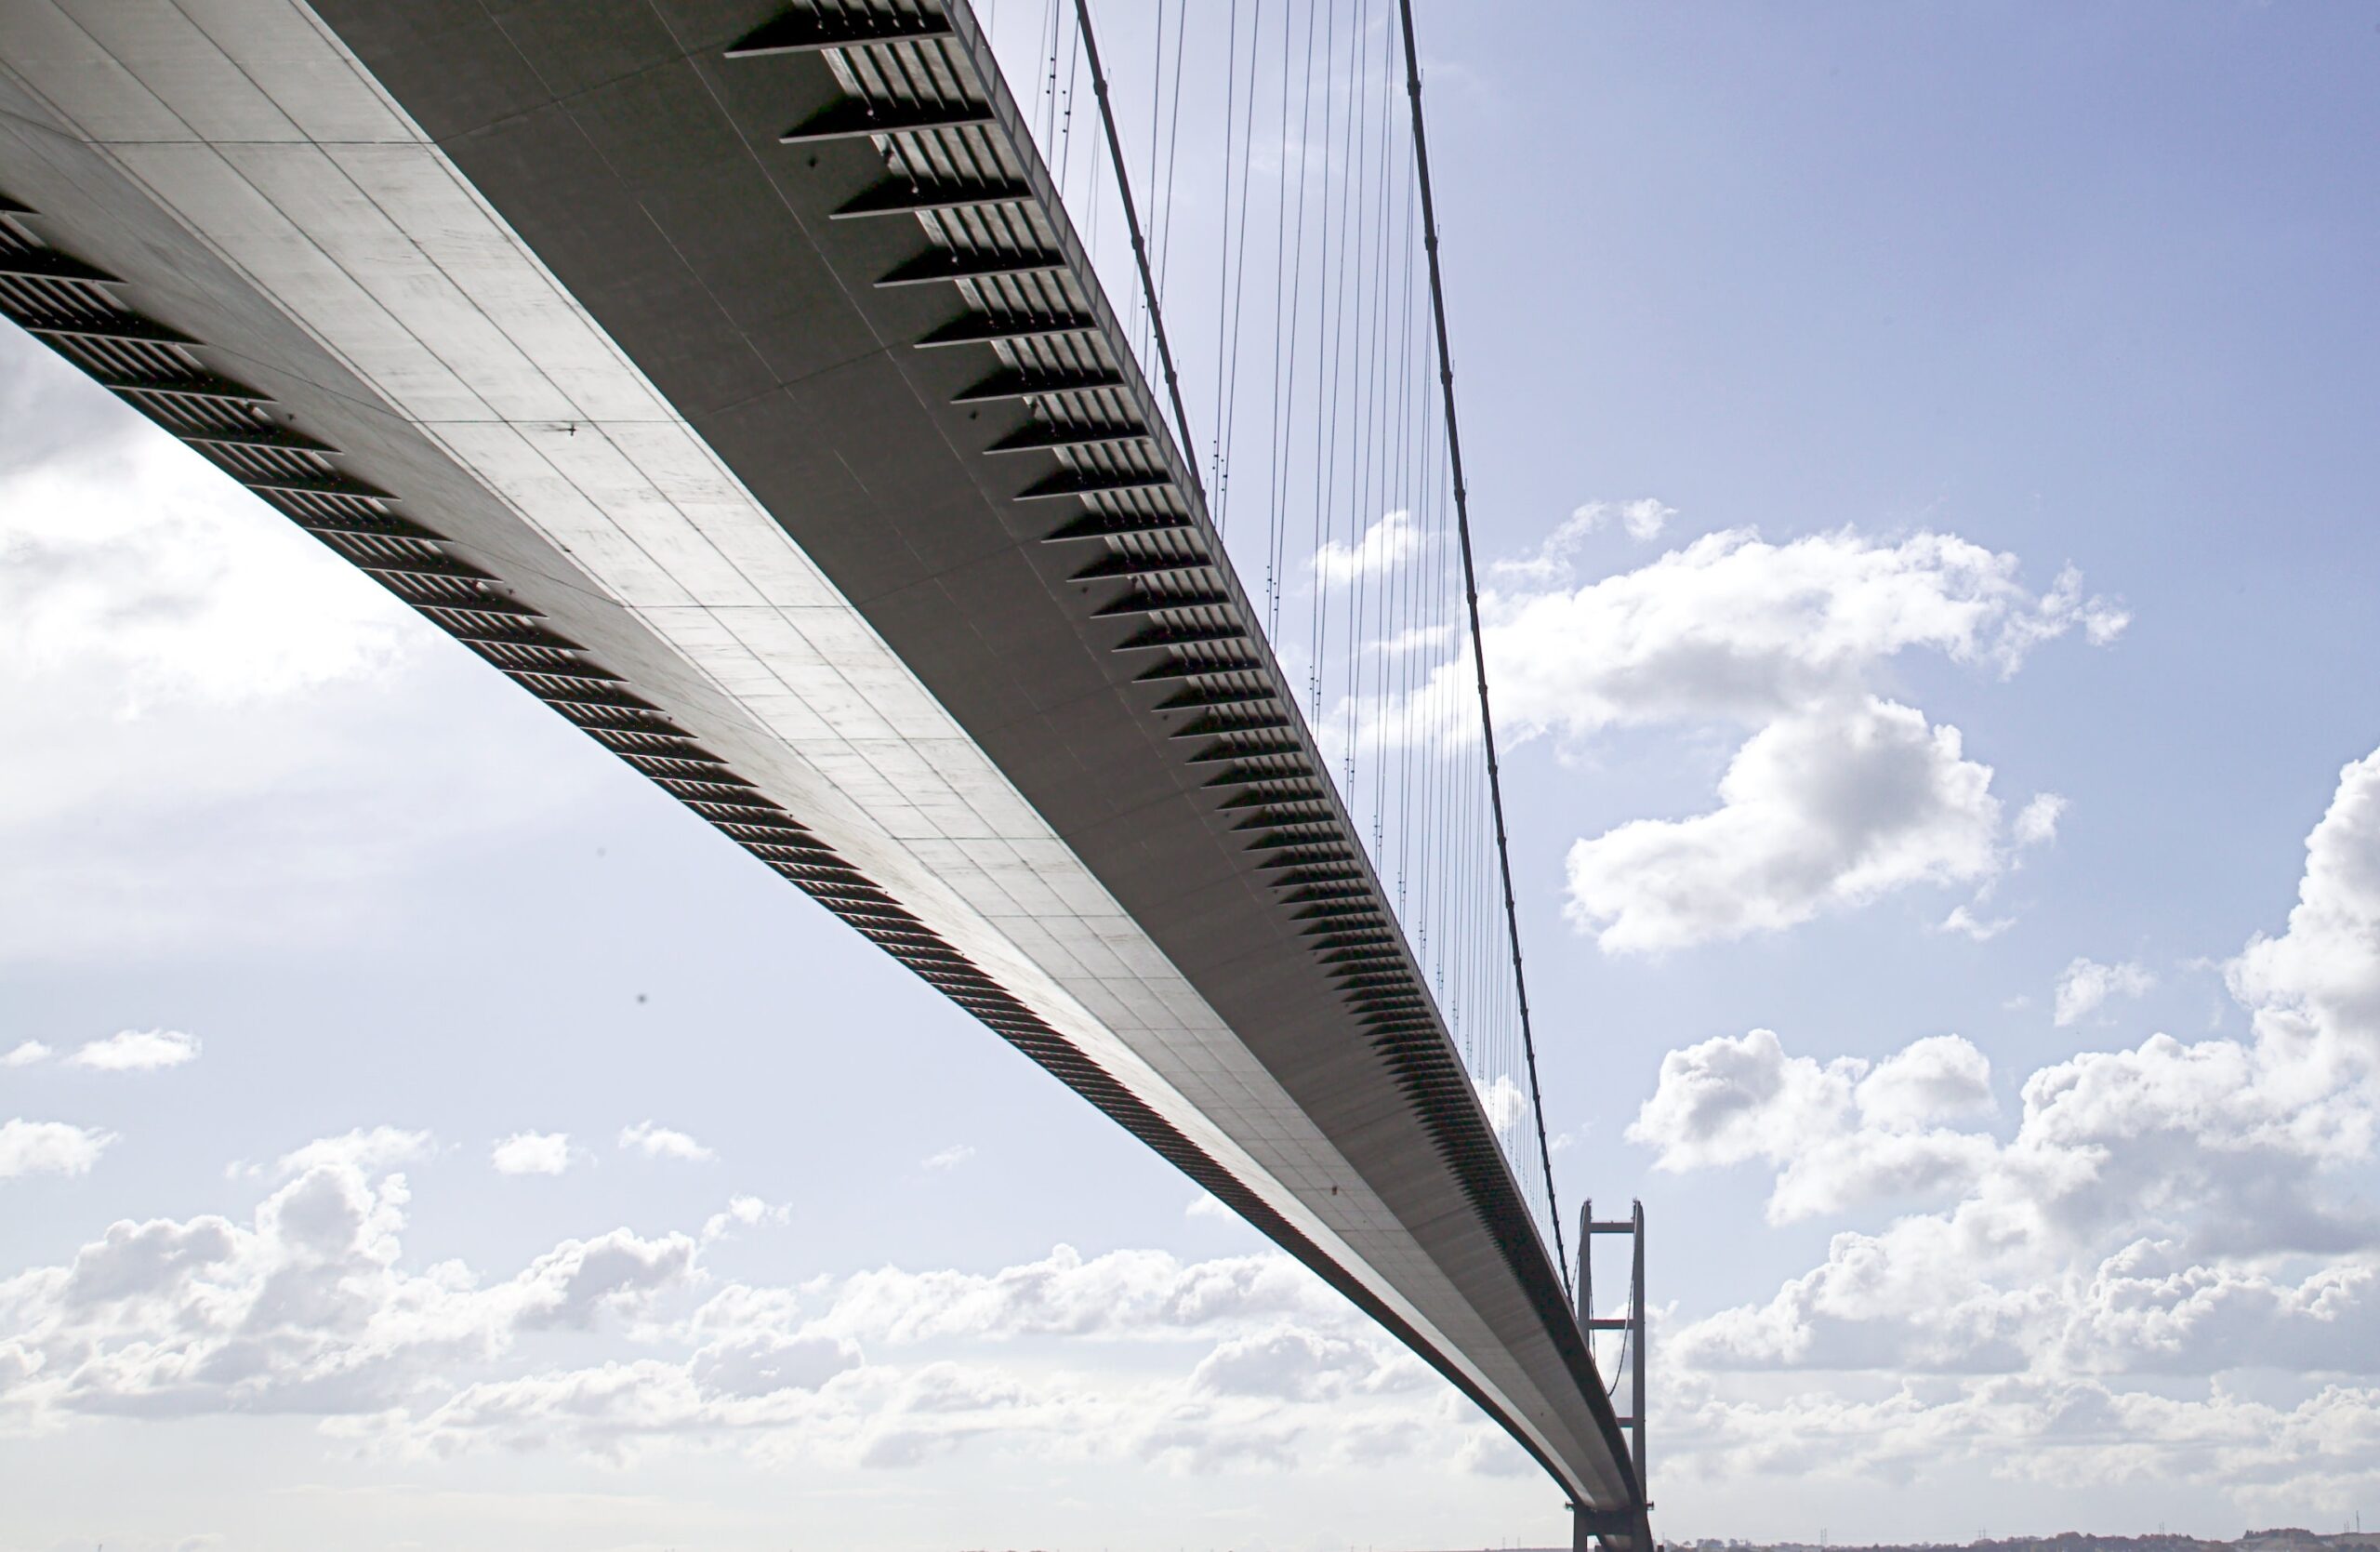 Humber Freeport approves £25m of investment for projects to drive green economic growth